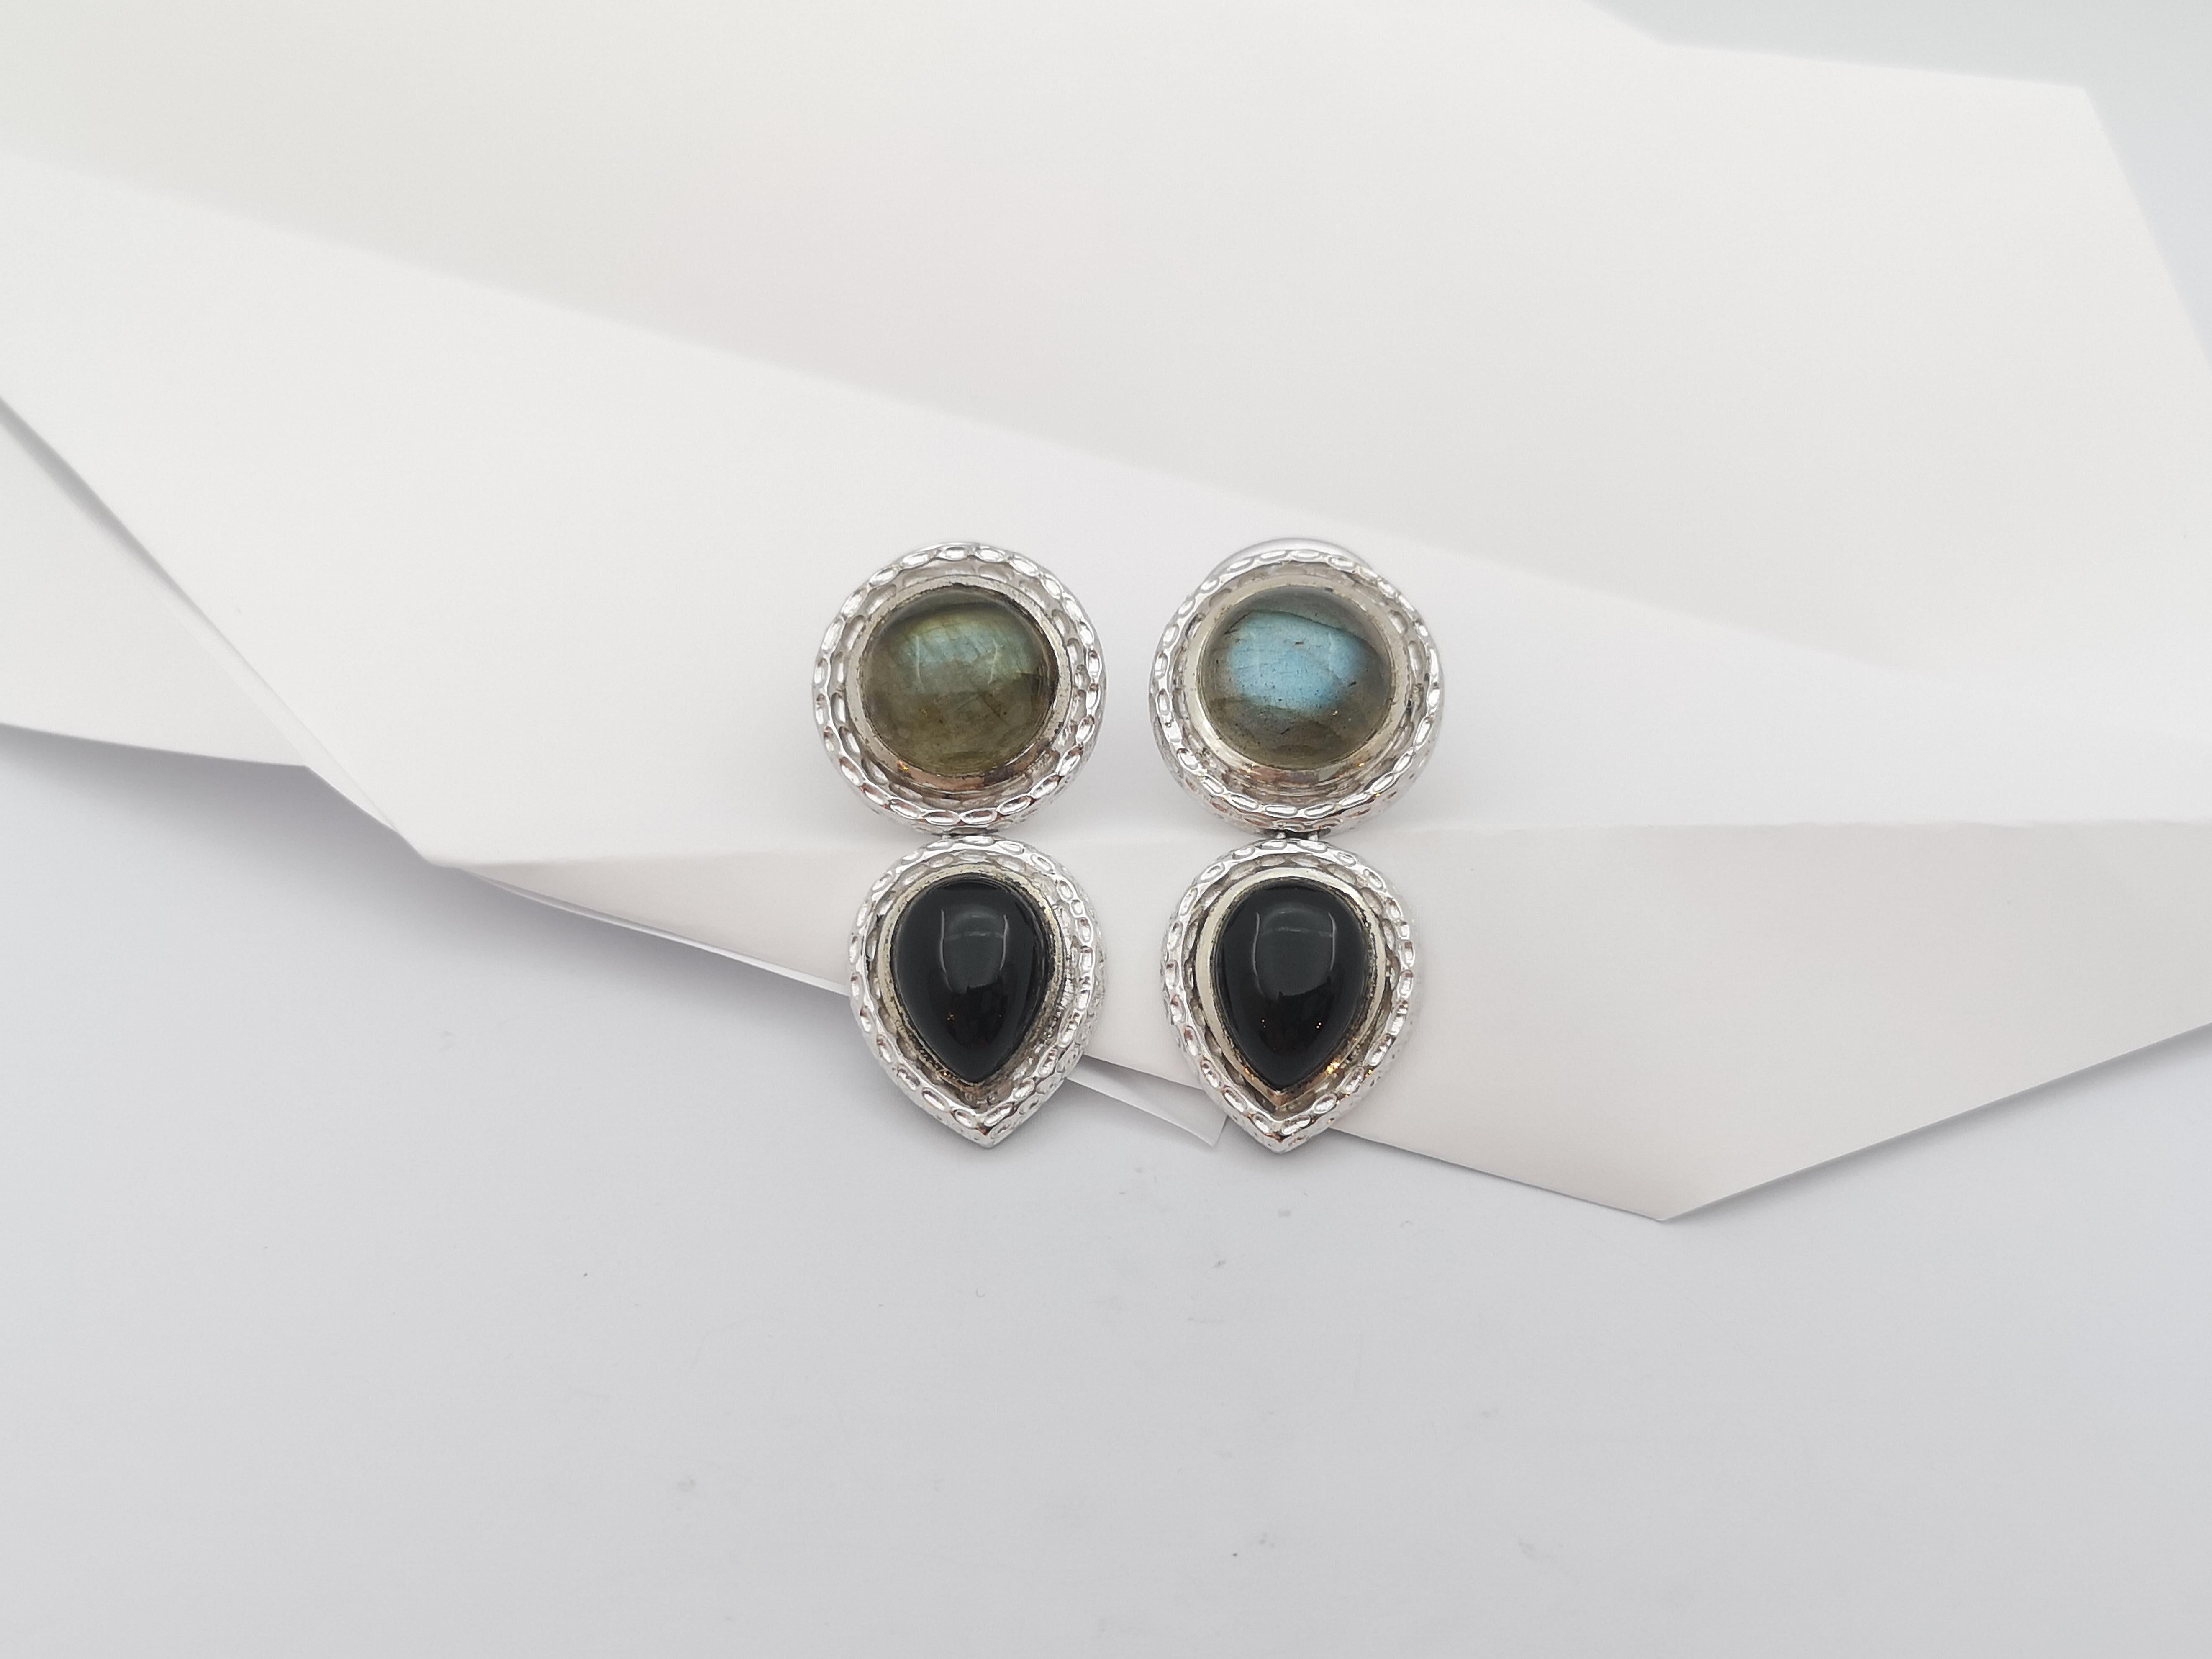 Cabochon Labradorite and Onyx Earrings set in Silver Settings For Sale